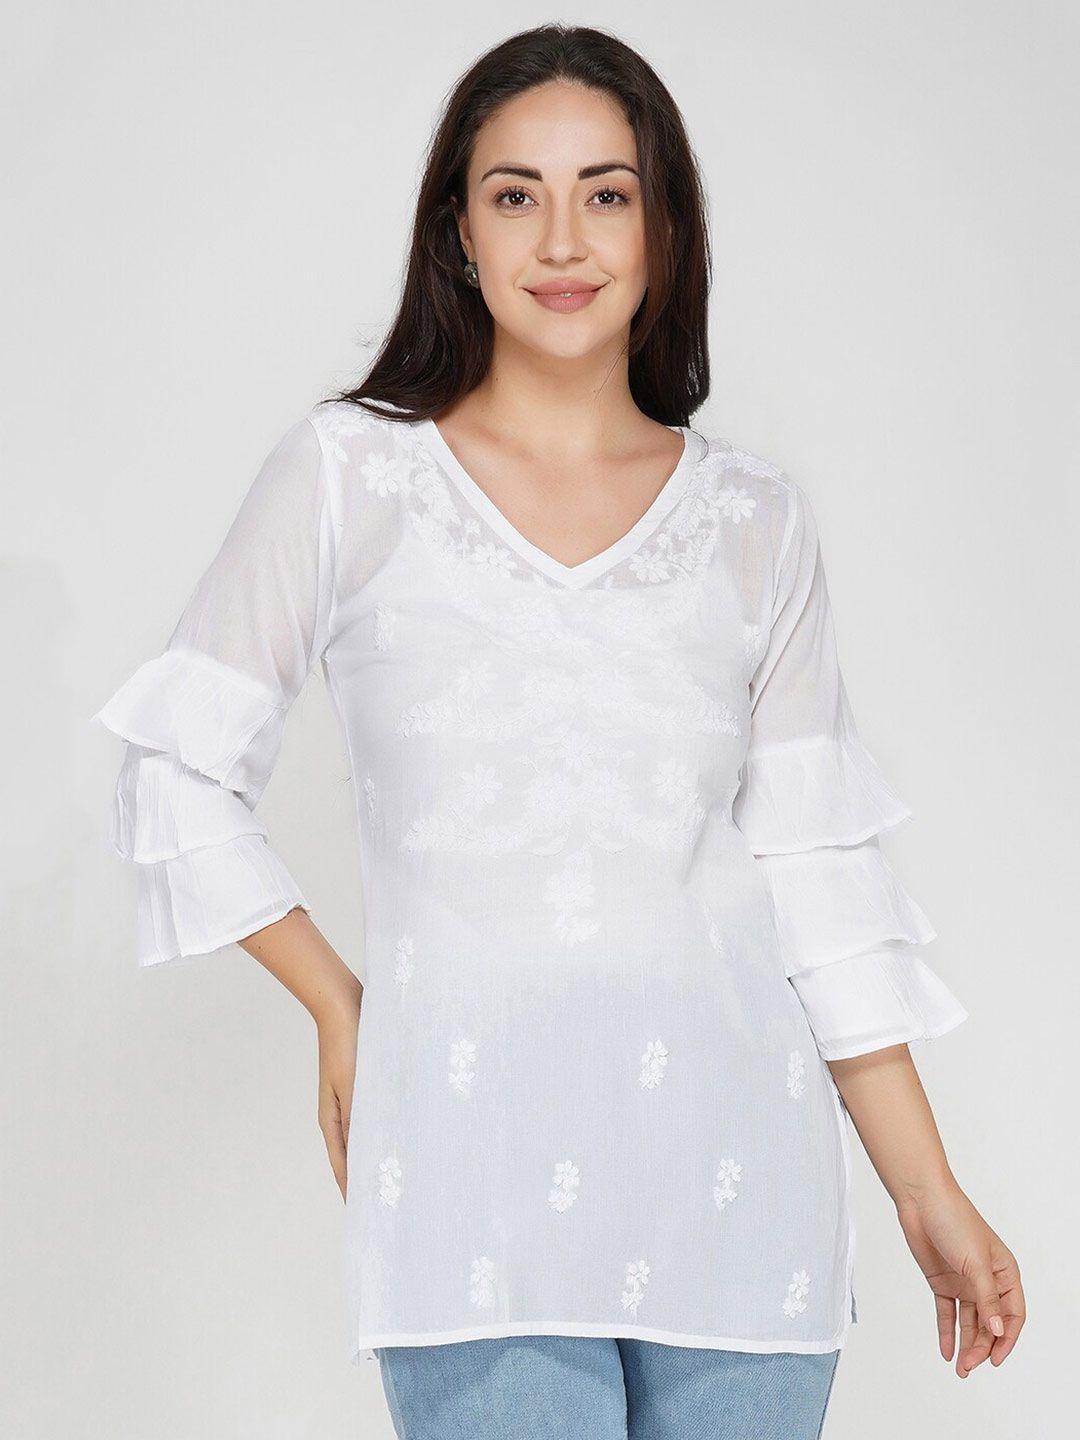 vahson-women-white-embriodered-pure-cotton-top